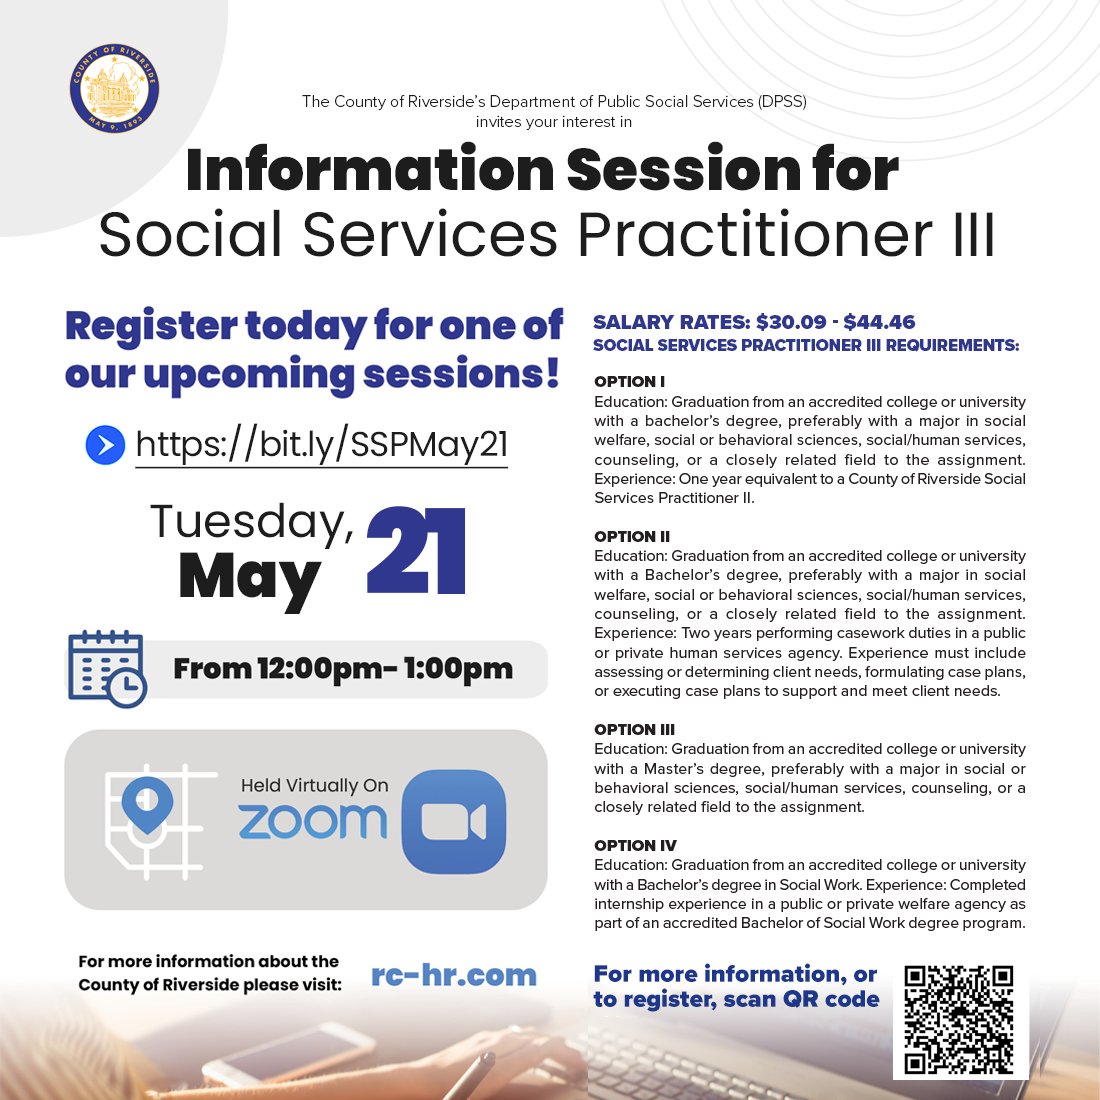 Join DPSS at our Virtual Social Services Practitioner Career Fair! Discover exciting opportunities, connect with recruiters, and unlock your potential in a fast-growing field. Register today!